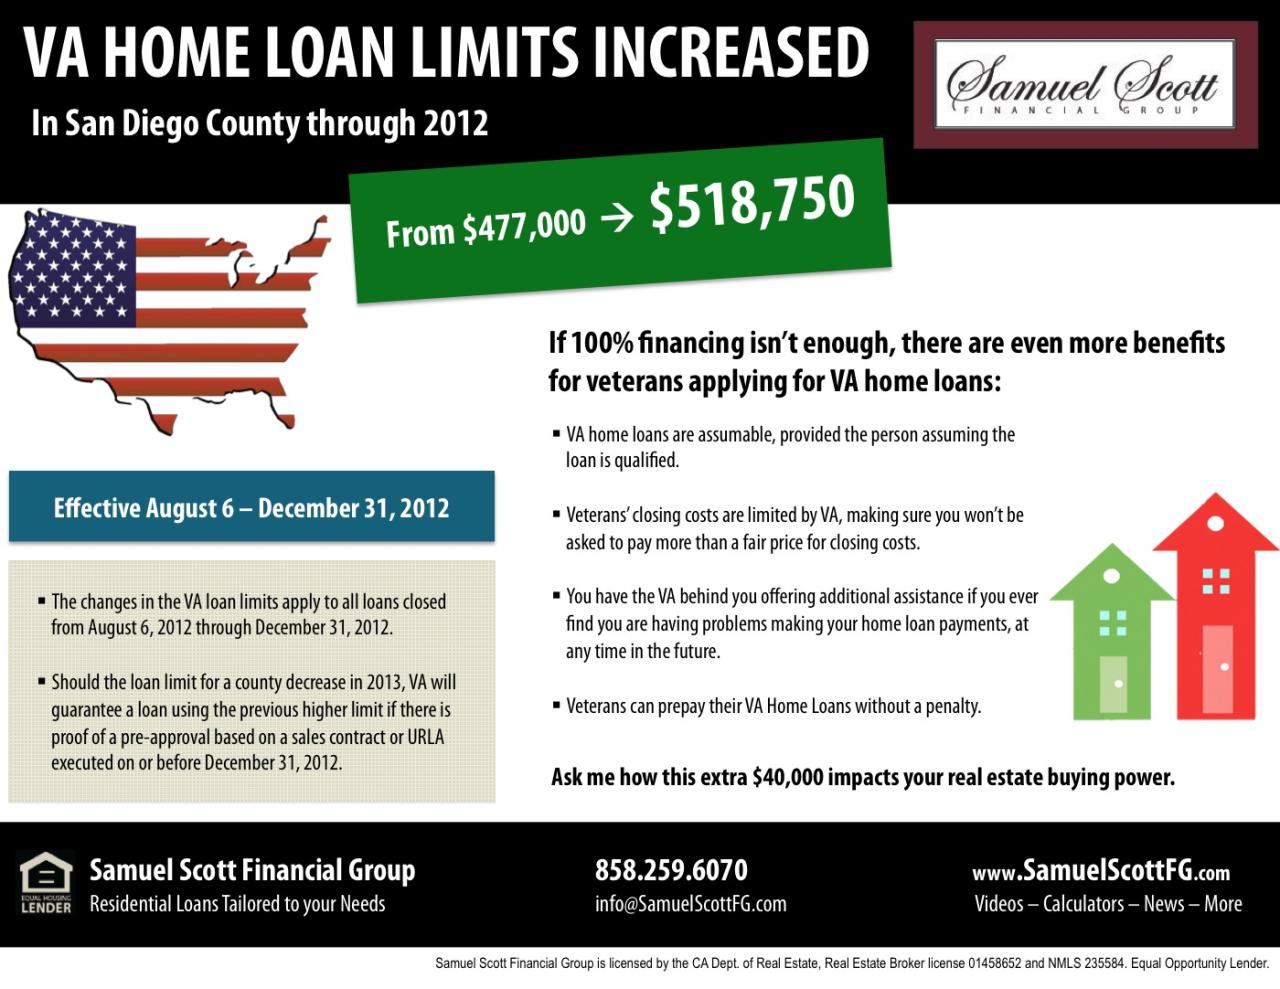 VA Home Loan Limits Raised to 518,750 in San Diego through December 31